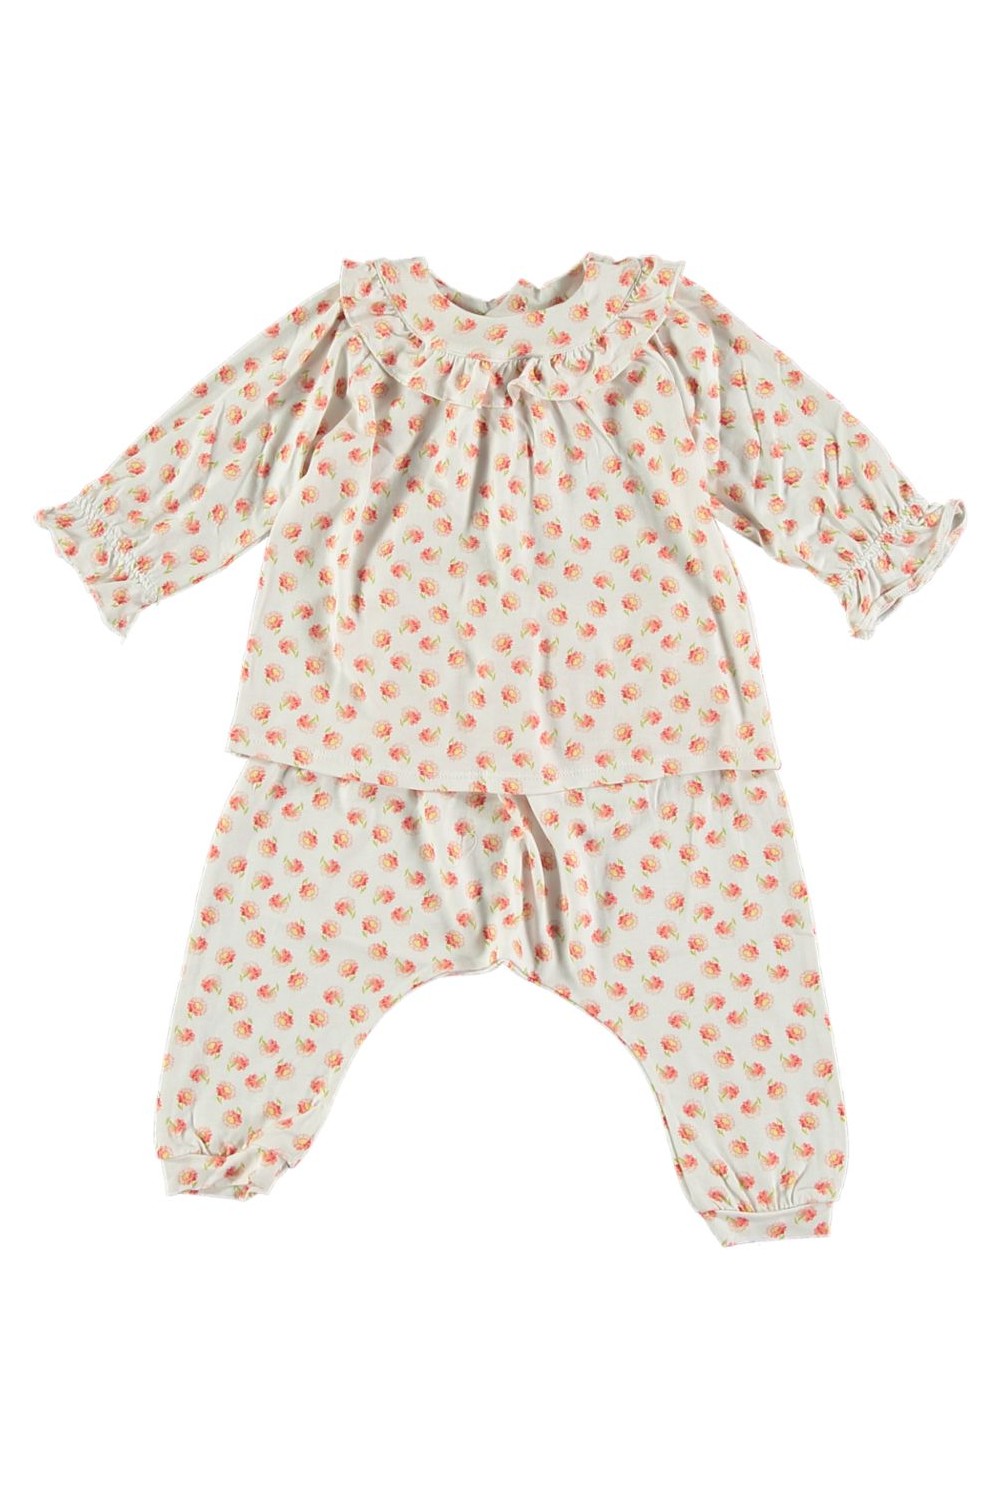 organic cotton baby corolle outfit daisy print